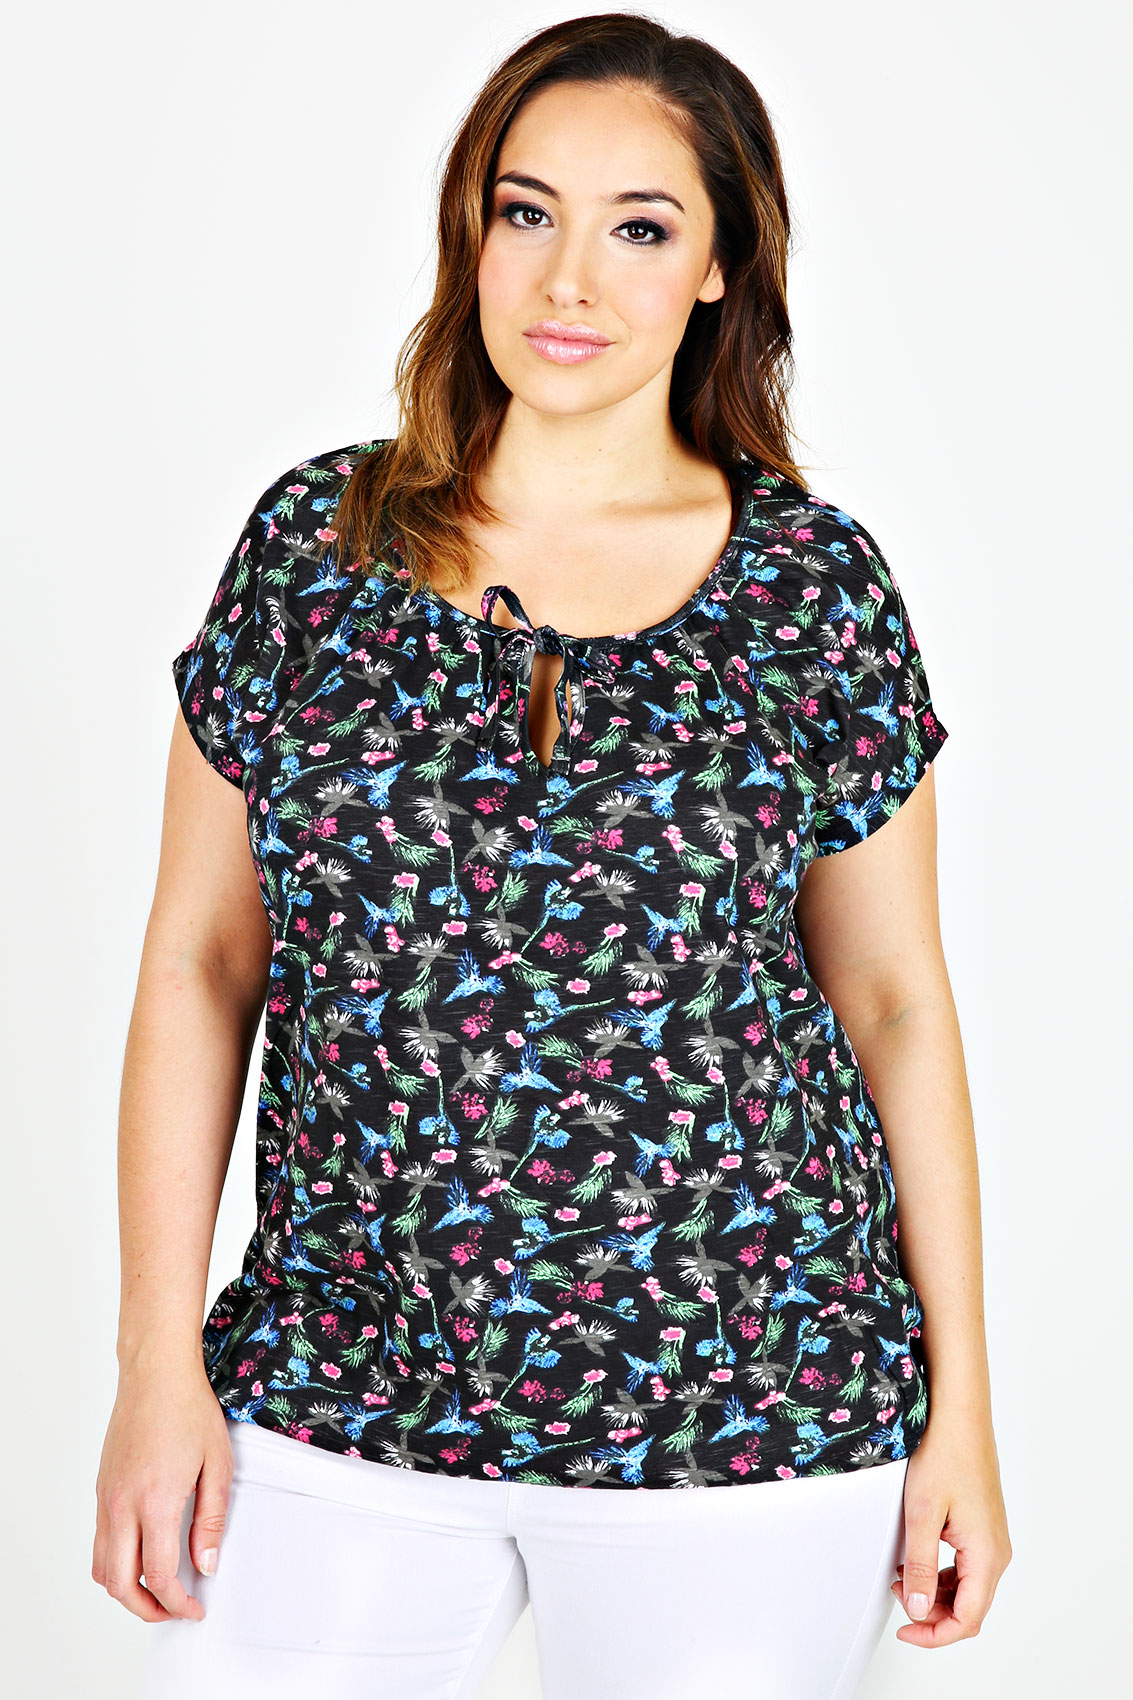 Black Floral Gypsy Top, Plus size 16 to 32